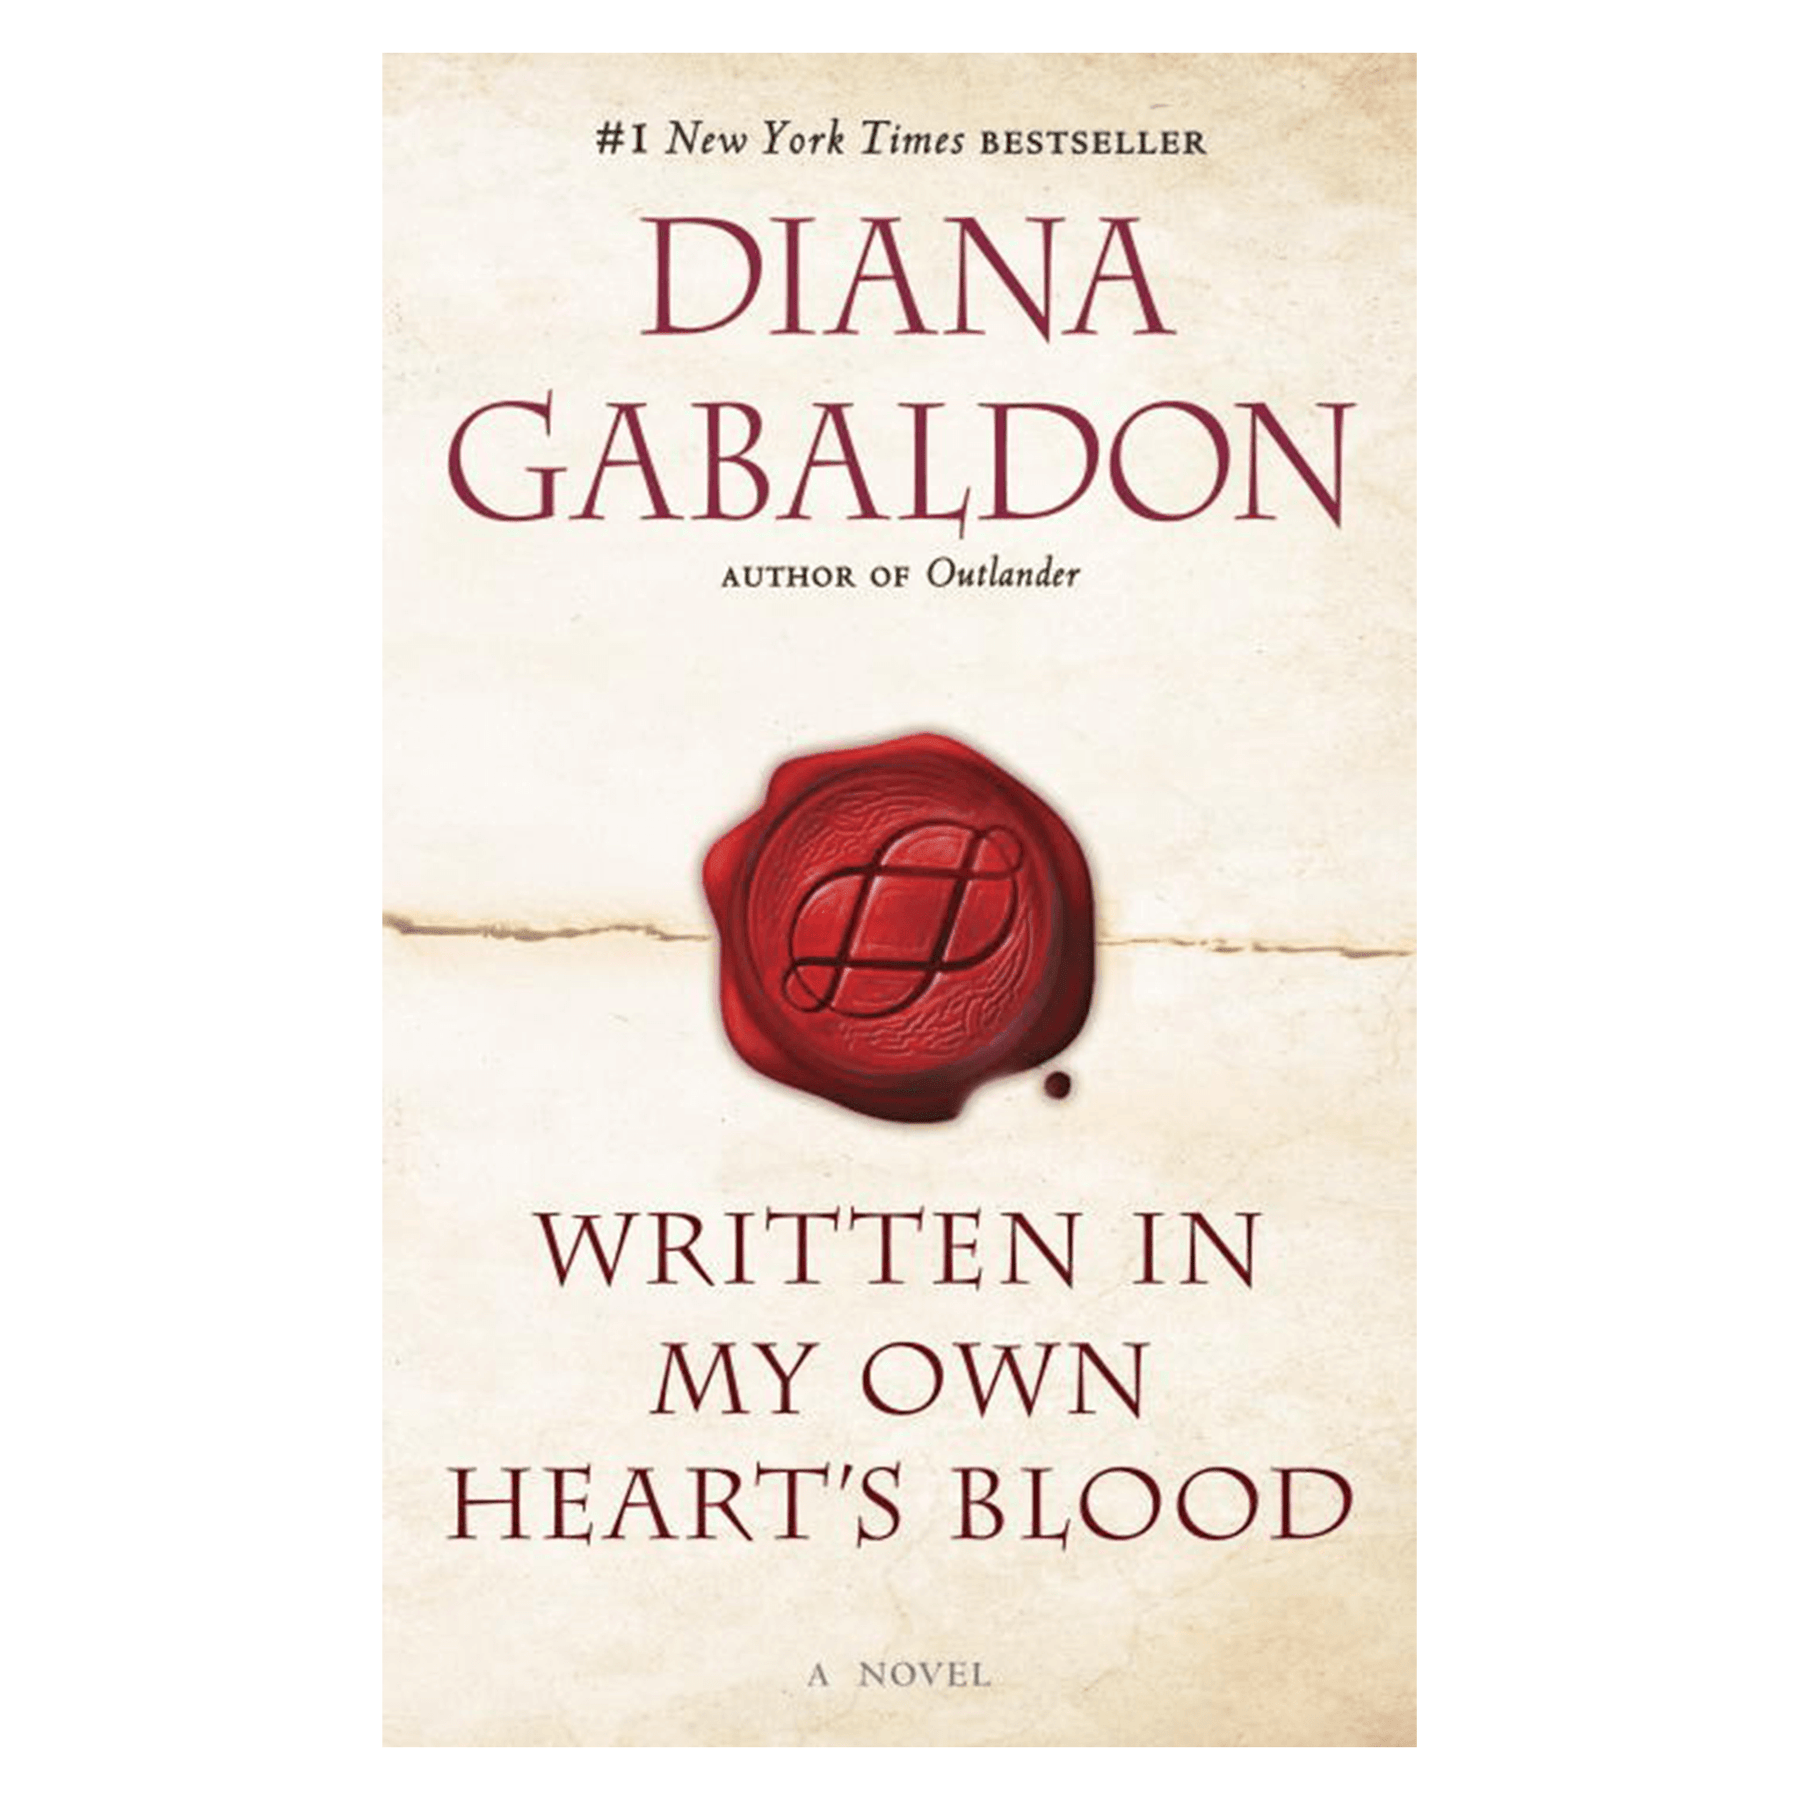 Outlander Series Diana Gabaldon Collection (1-6) 6 Books Bundle Collection  With Gift Journal (Outlander, Dragonfly In Amber, Voyager, Drums Of Autumn